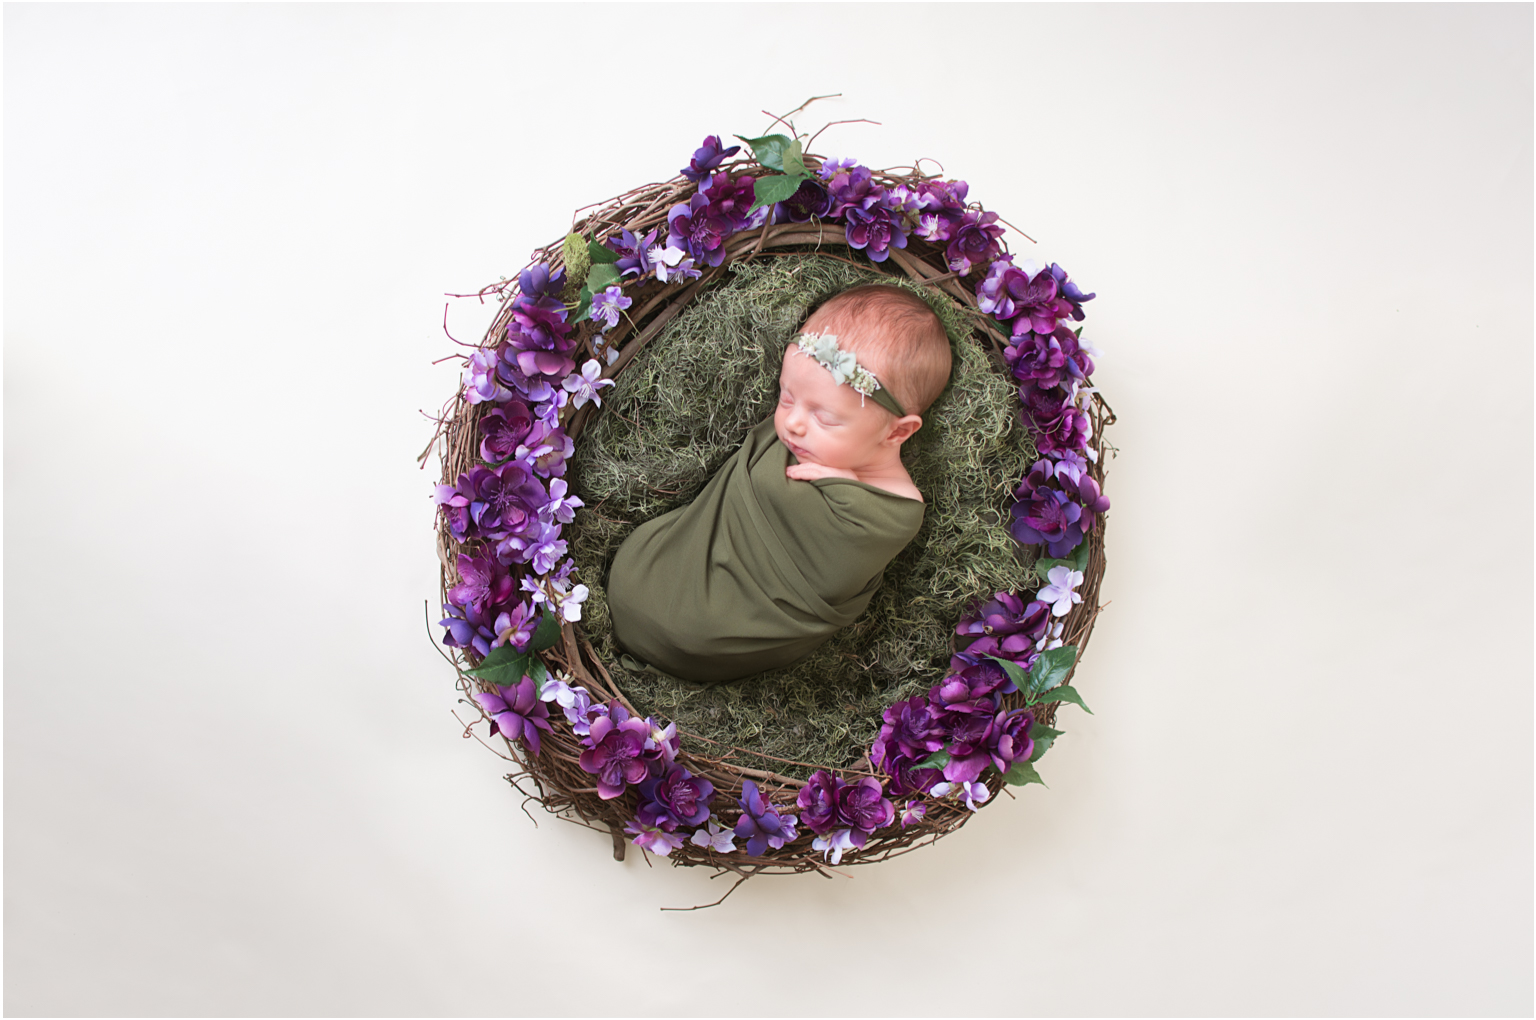 Juliann in greens and purple florals all snuggled in a wreath 